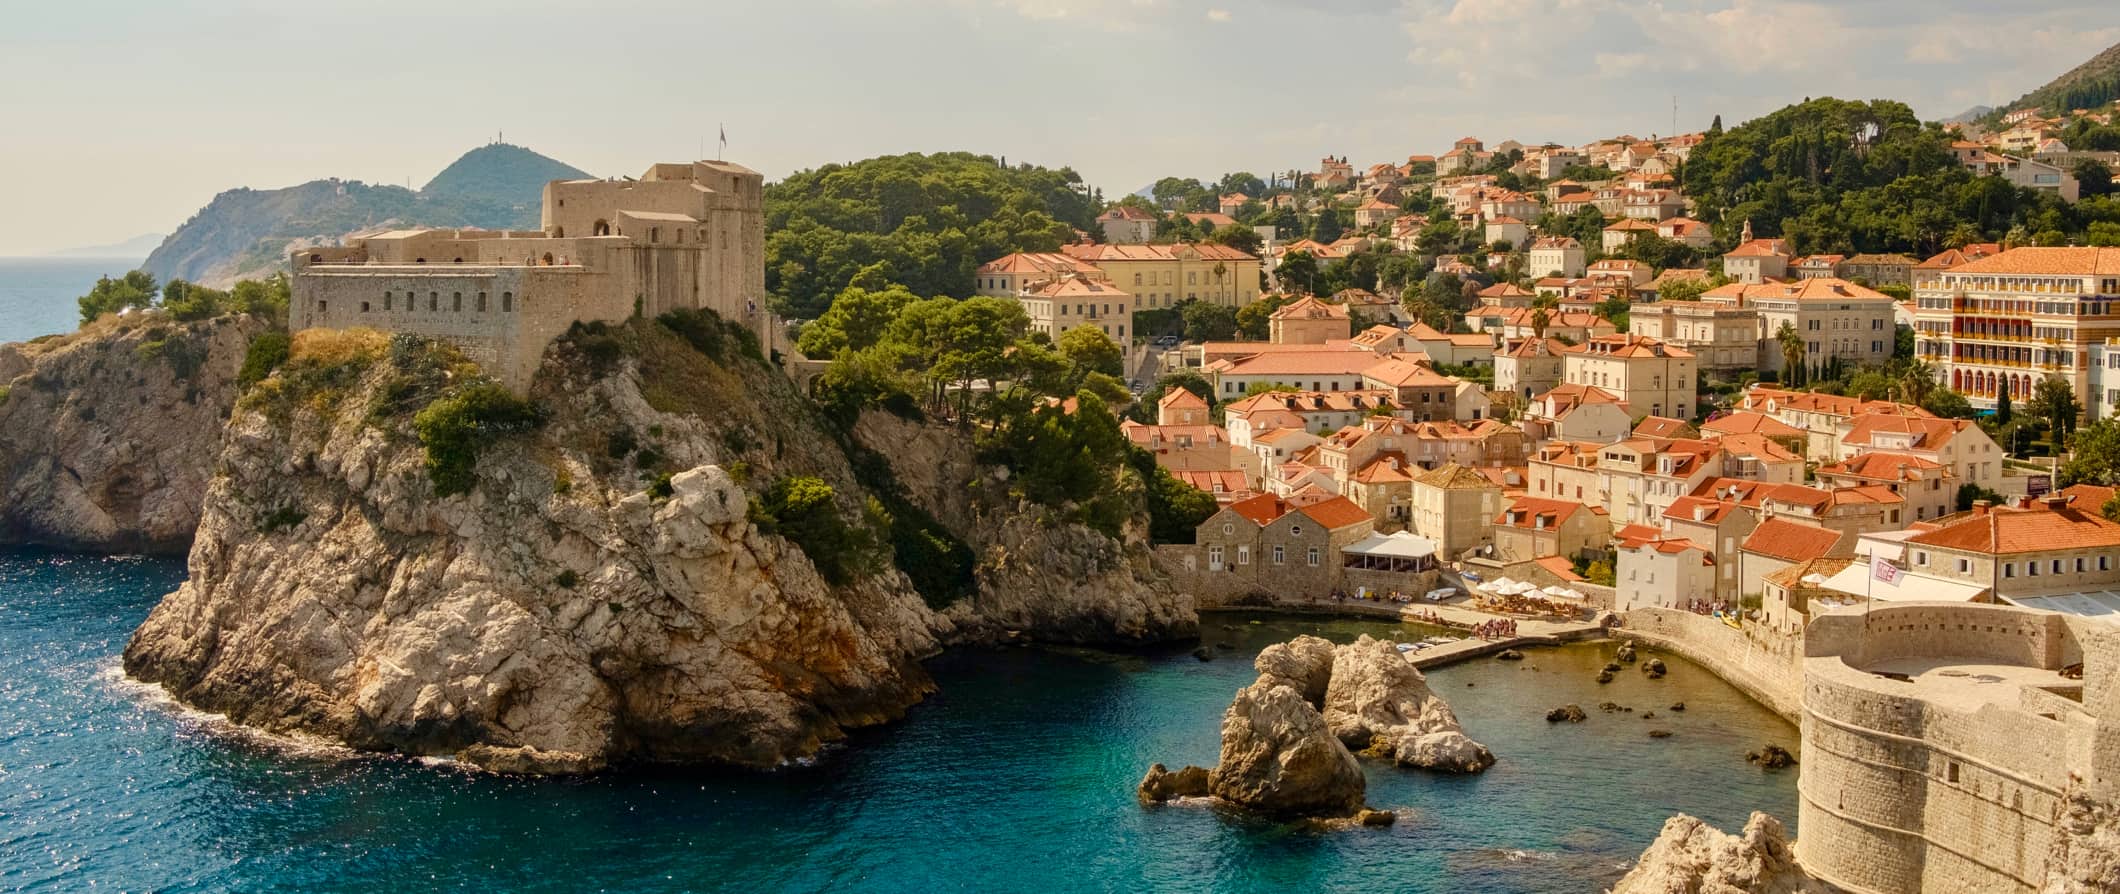 The rugged coast of Croatia enveloped by historic buildings and architecture